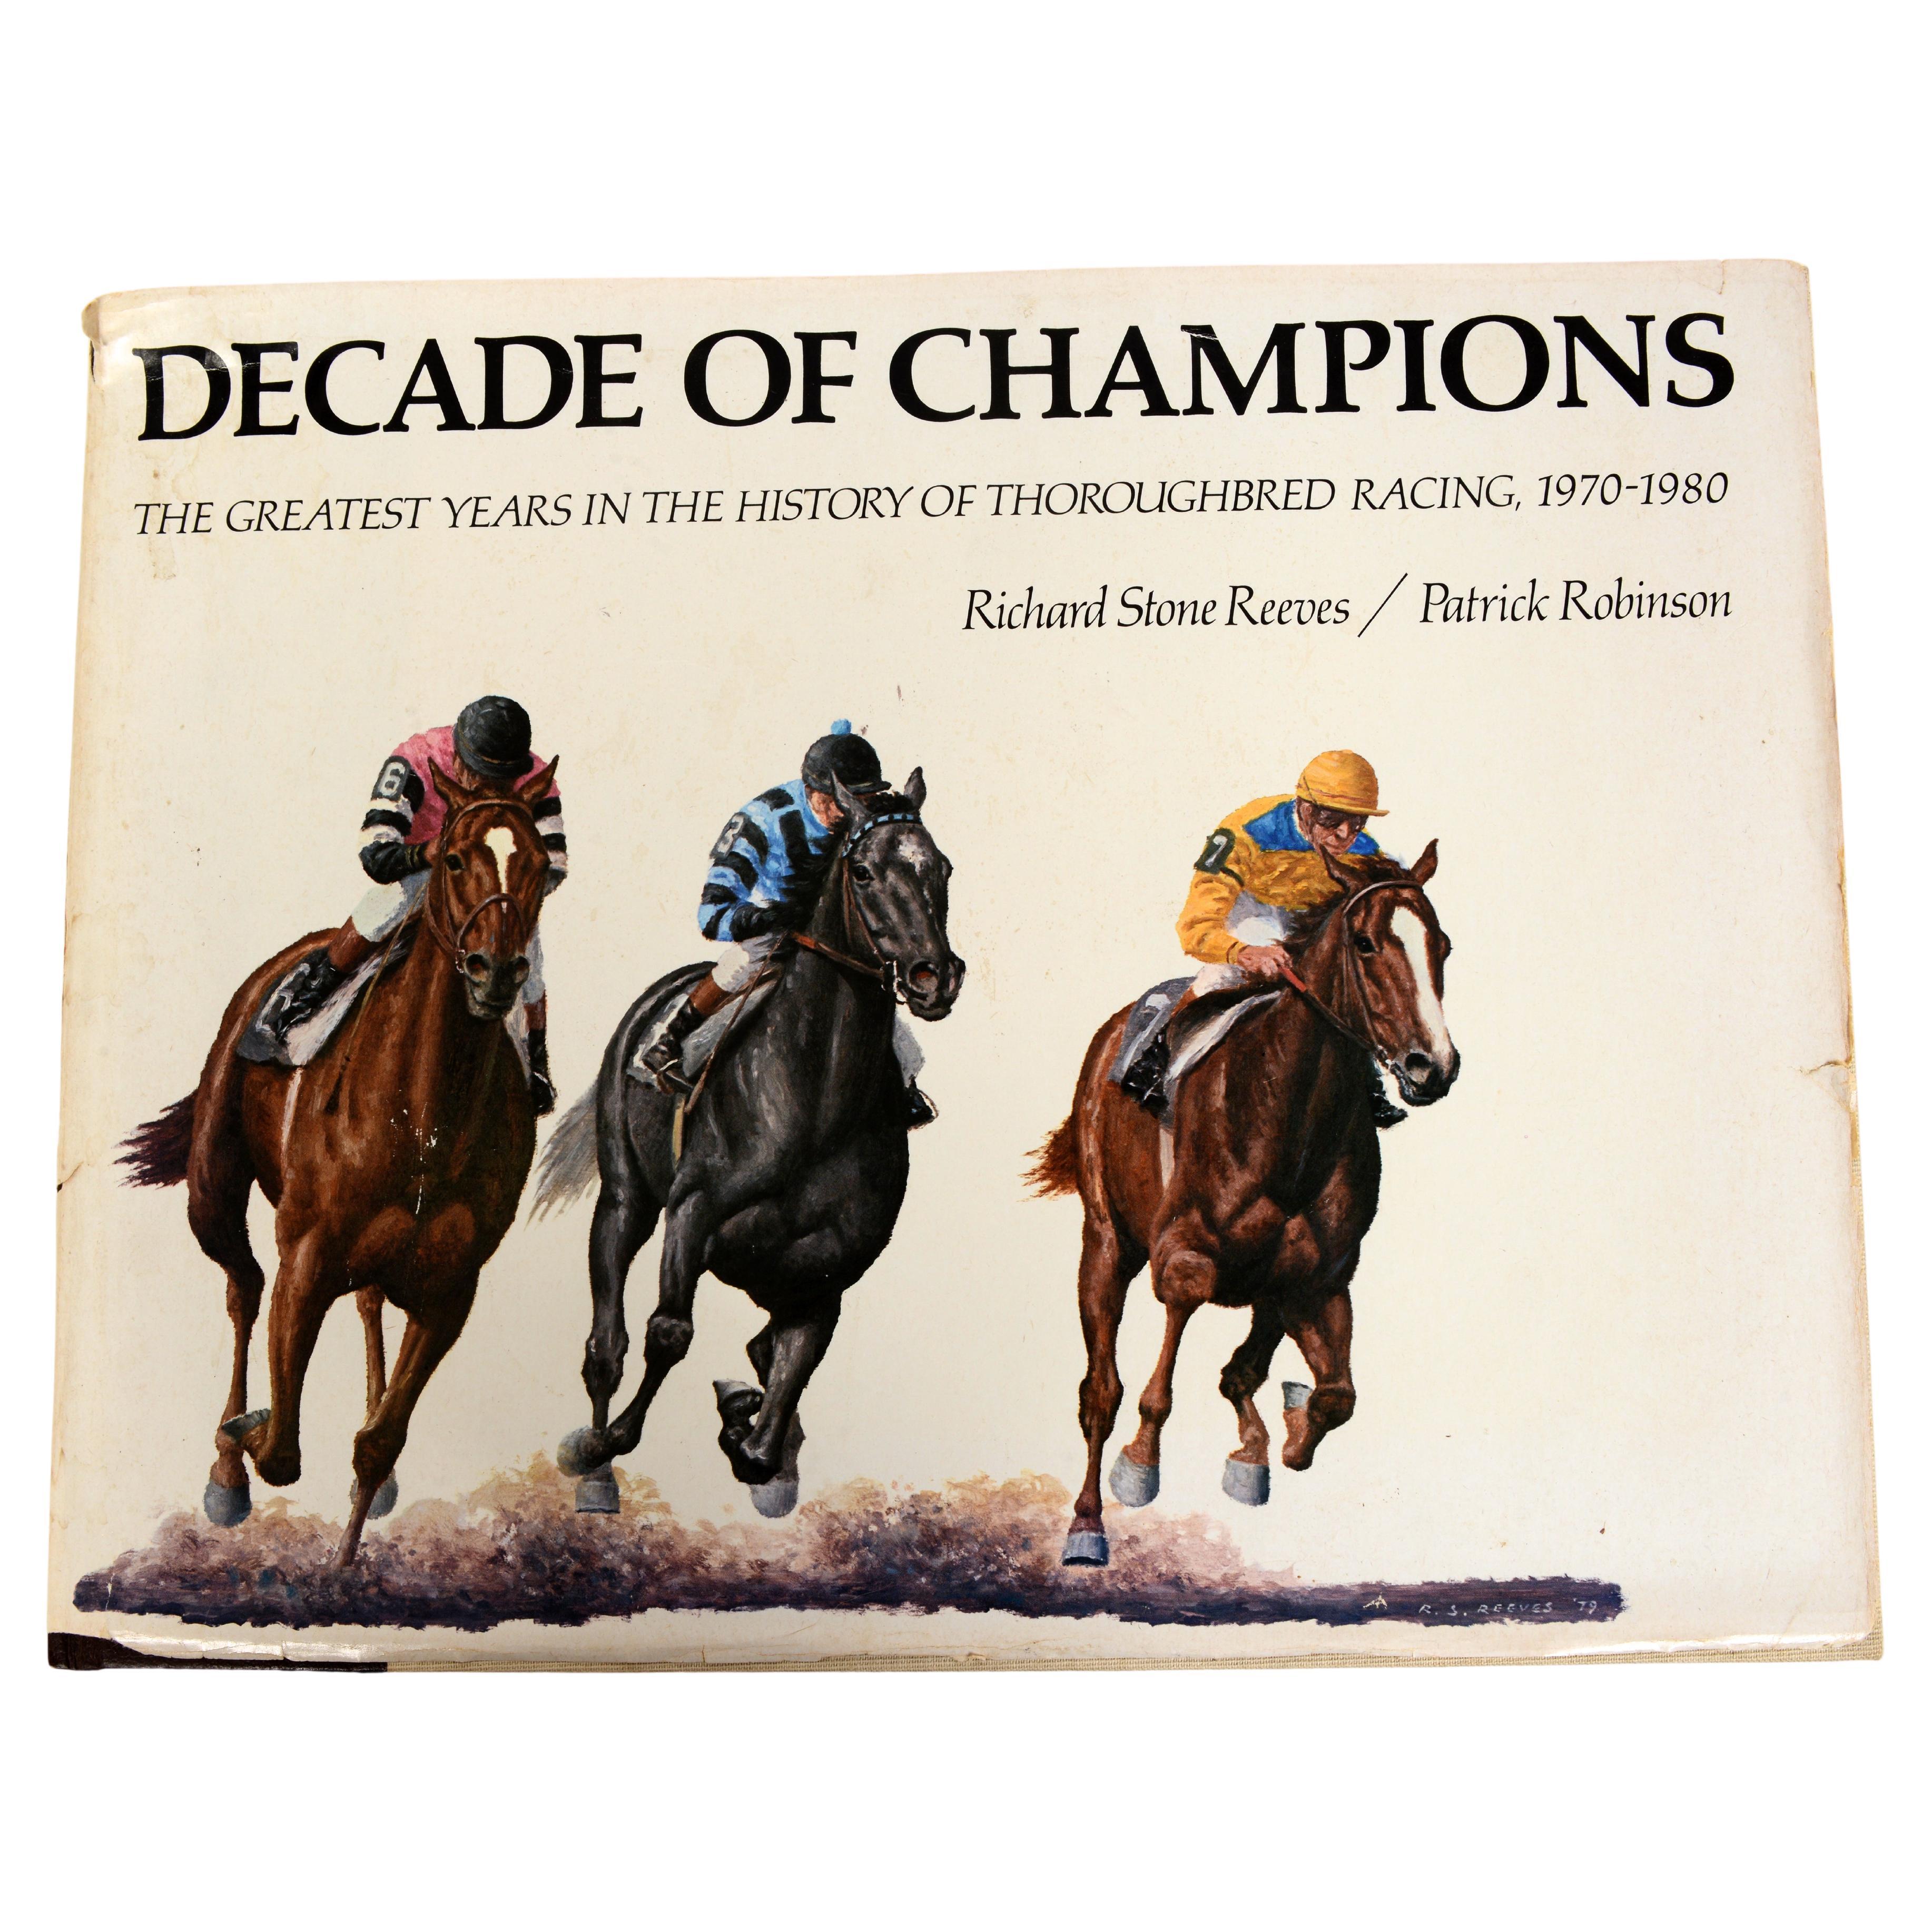 A Decade of Champions by Richard Stone Reeves and Patrick Robinson, 1st Ed  For Sale